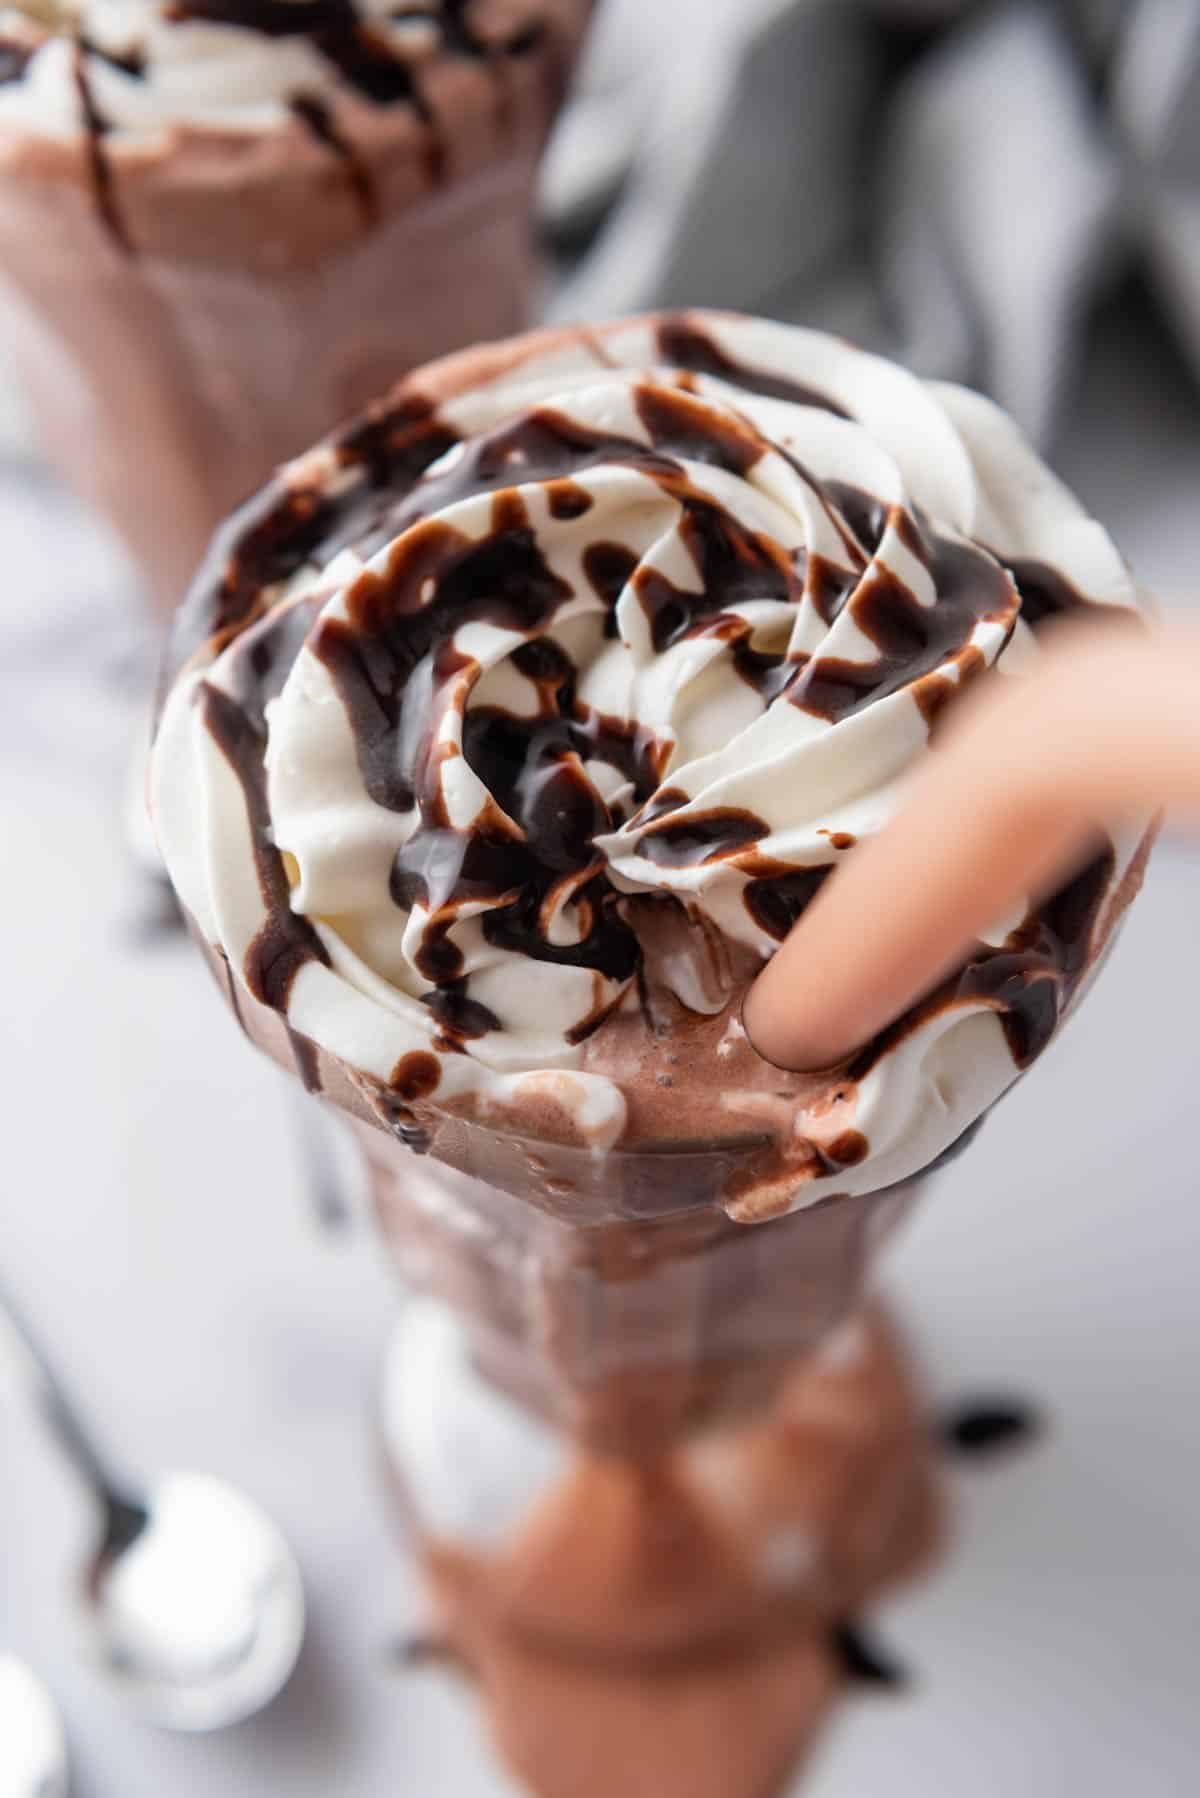 An overhead image of a chocolate milkshake with a straw in it.